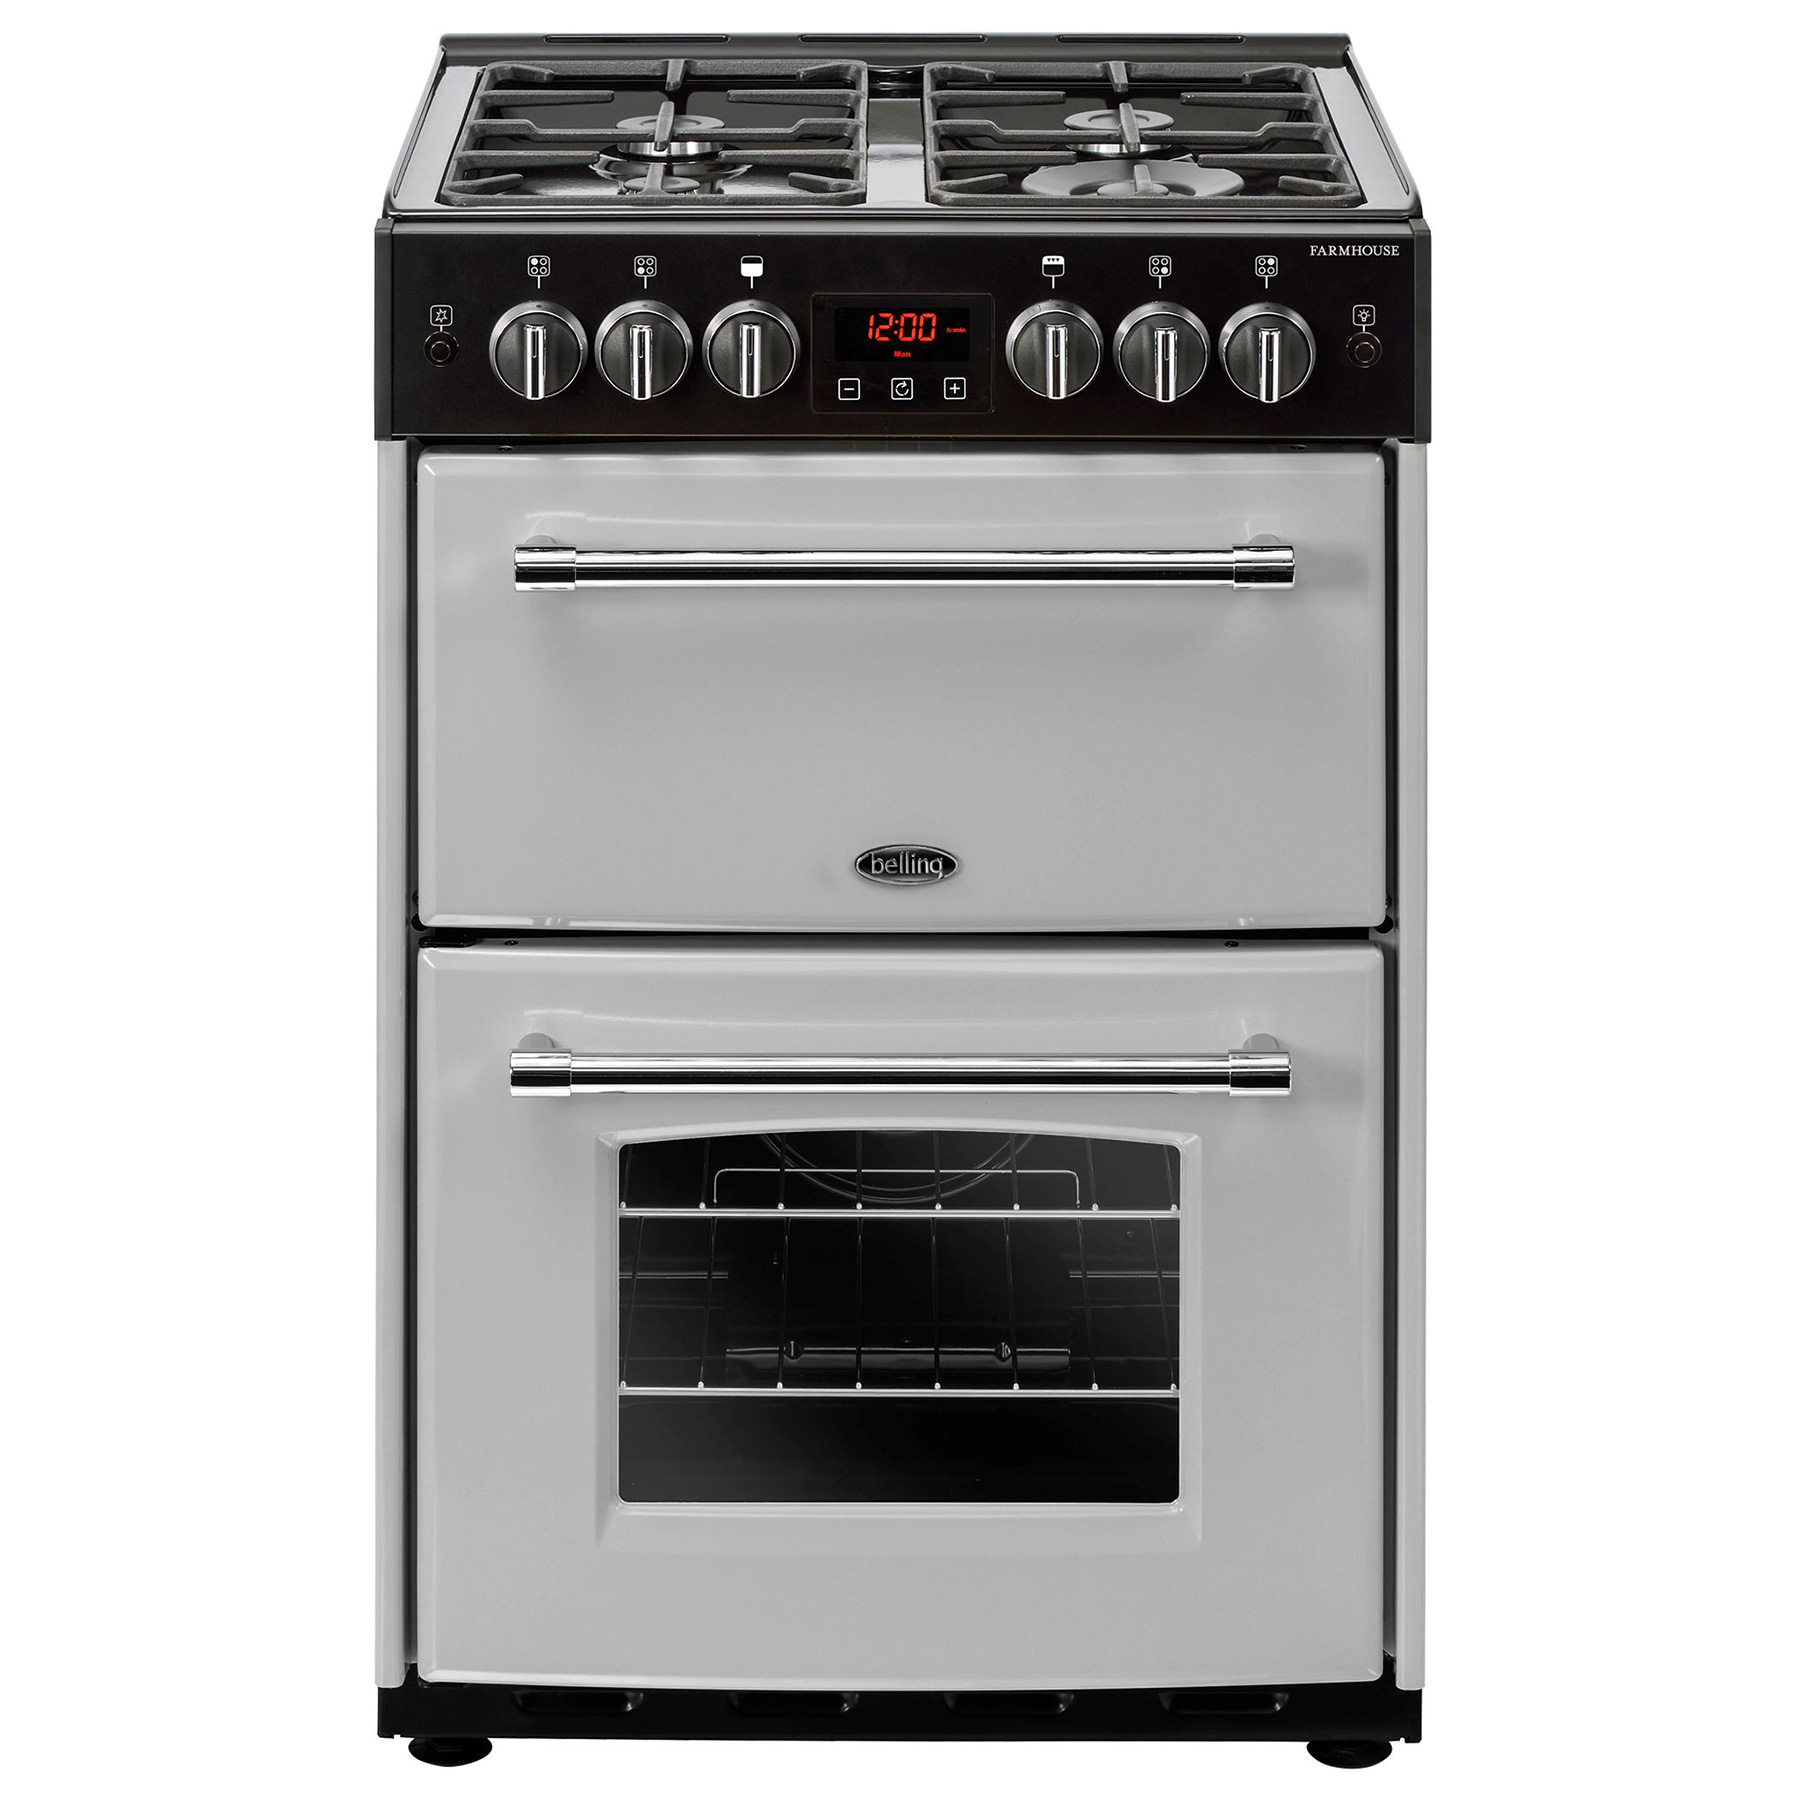 Image of Belling 444410791 60cm Farmhouse 60G Double Oven Gas Cooker in Silver